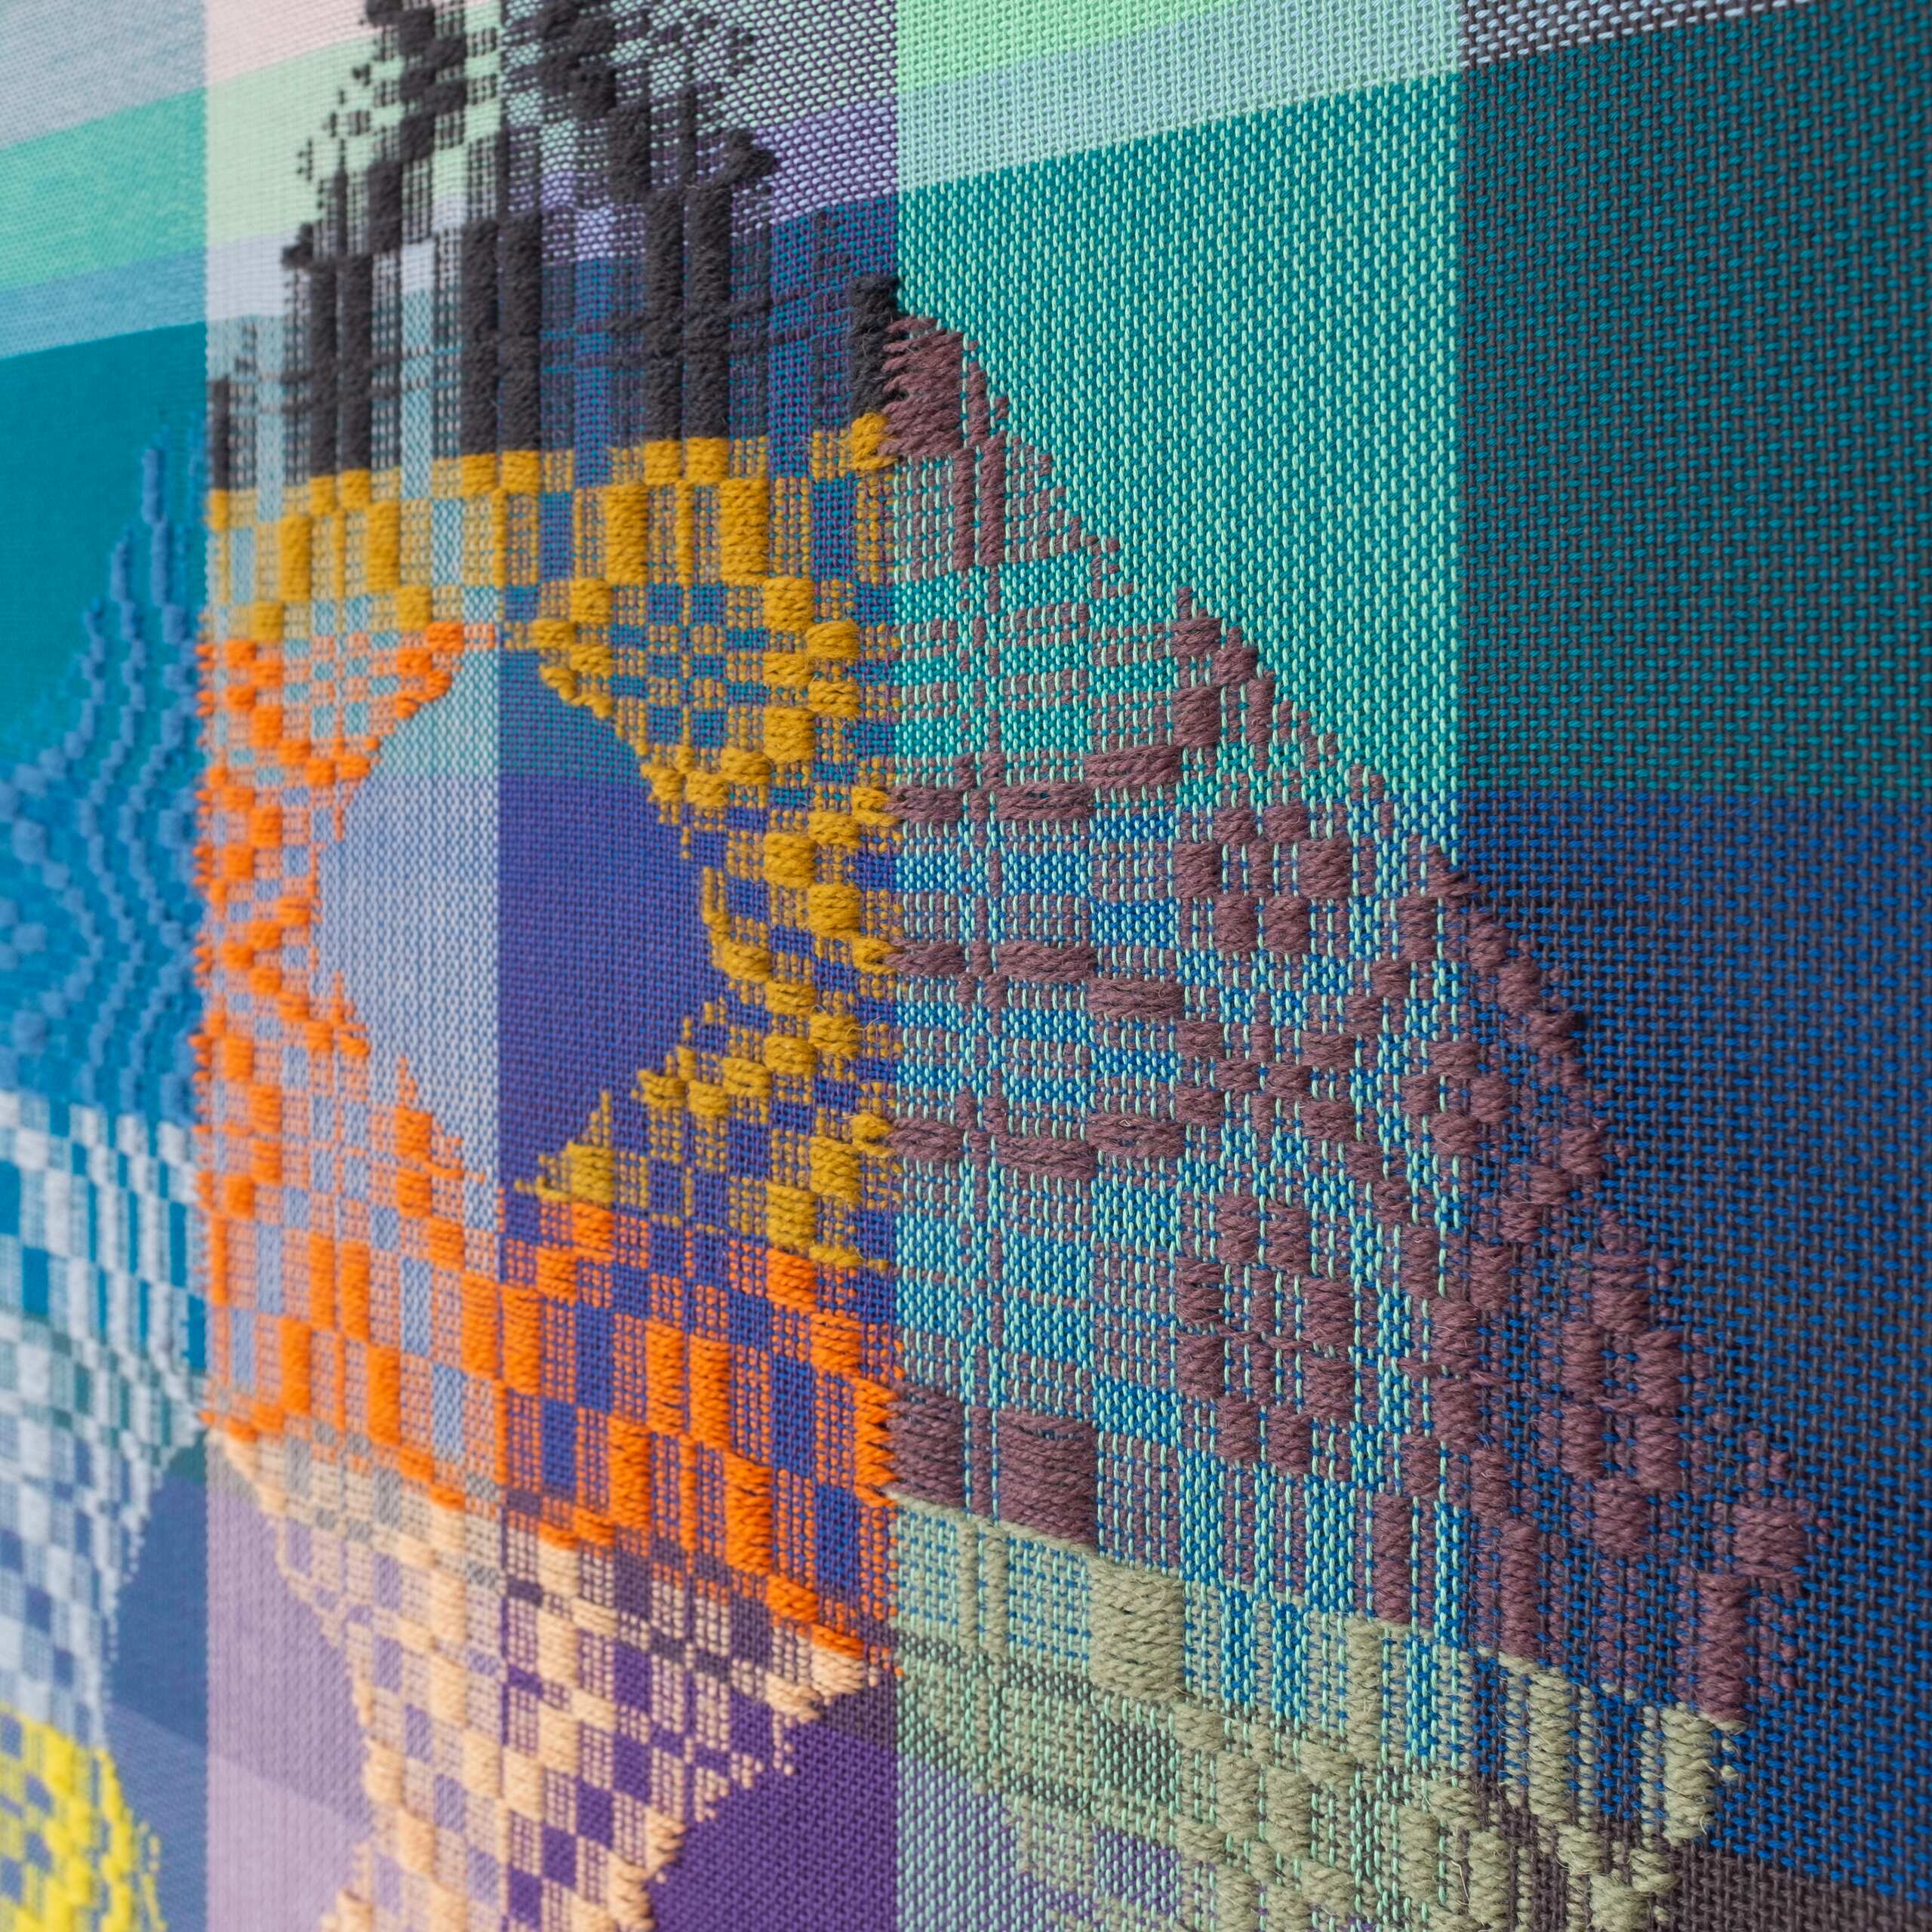 Thought-form [pyramid], Hand-woven cotton and wool yarn, 2022